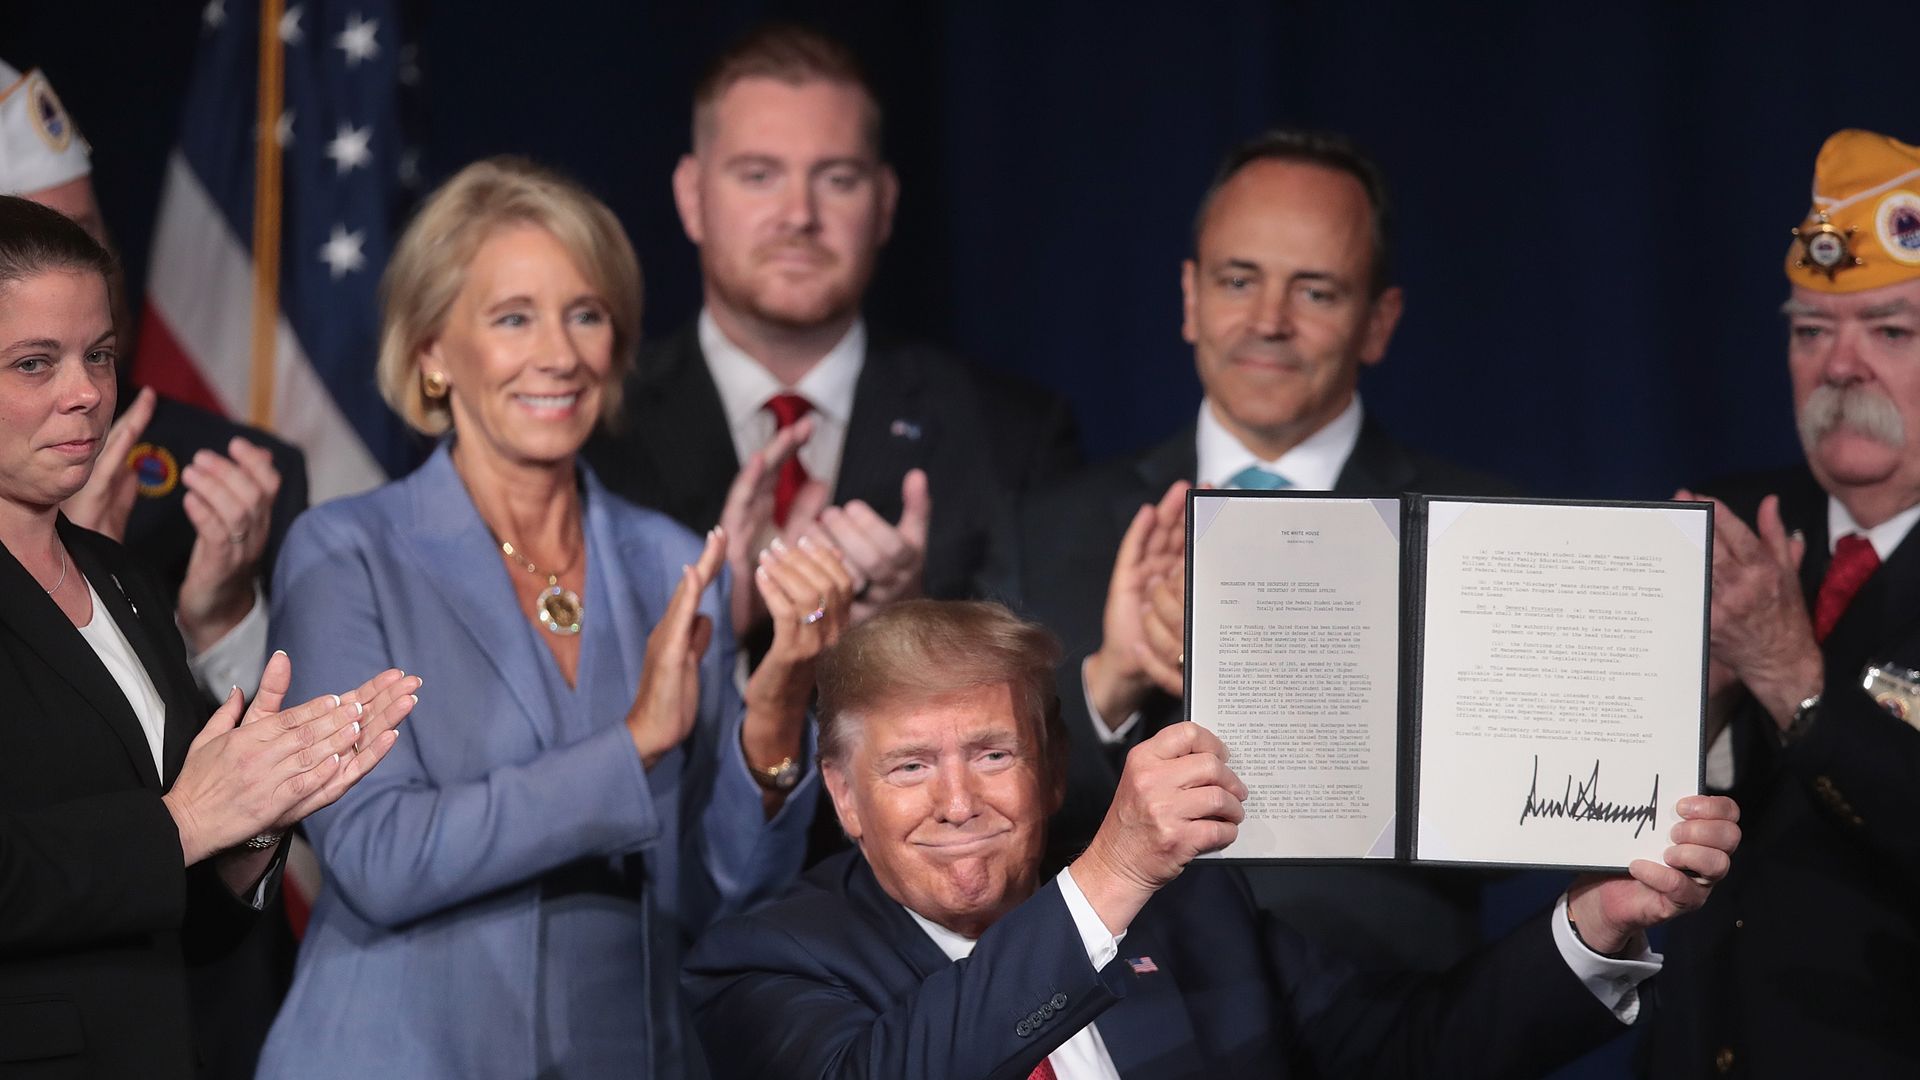  President Donald Trump signs a proclamation that will eliminate student loan debt for qualifying disabled veterans following a speech at the American Veterans